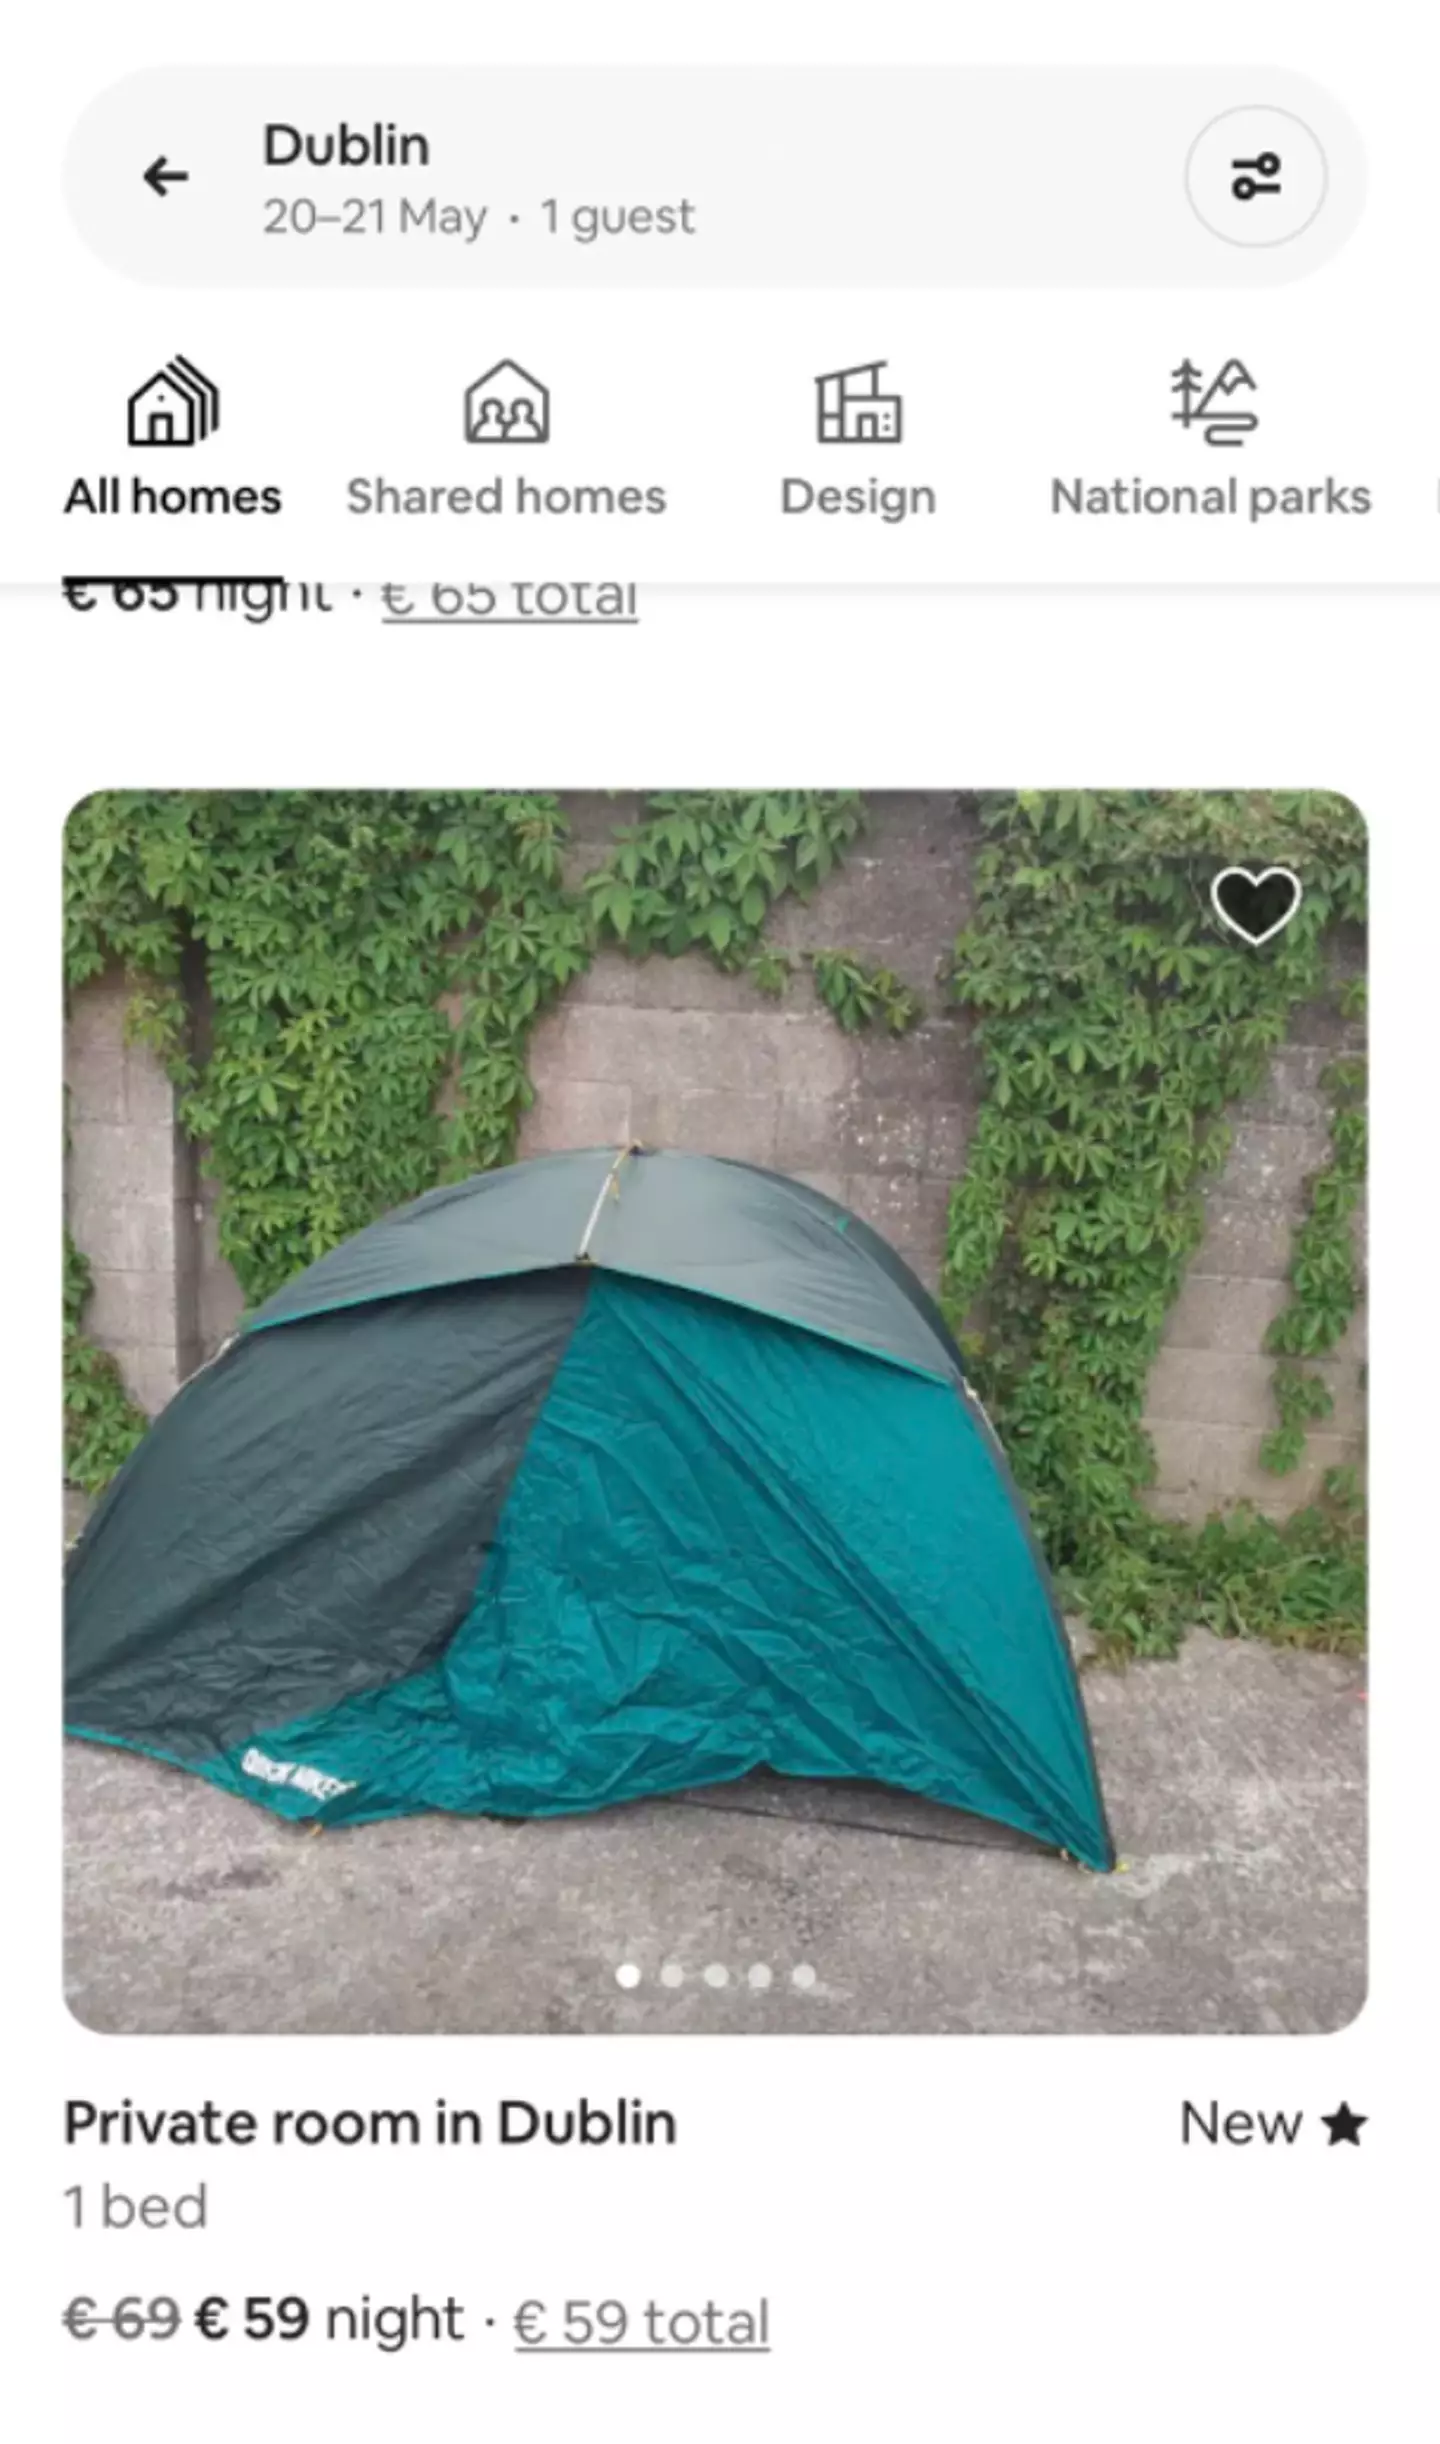 For almost £60, holiday-goers could have had the luxury of a pop-up tent in someone's back garden.